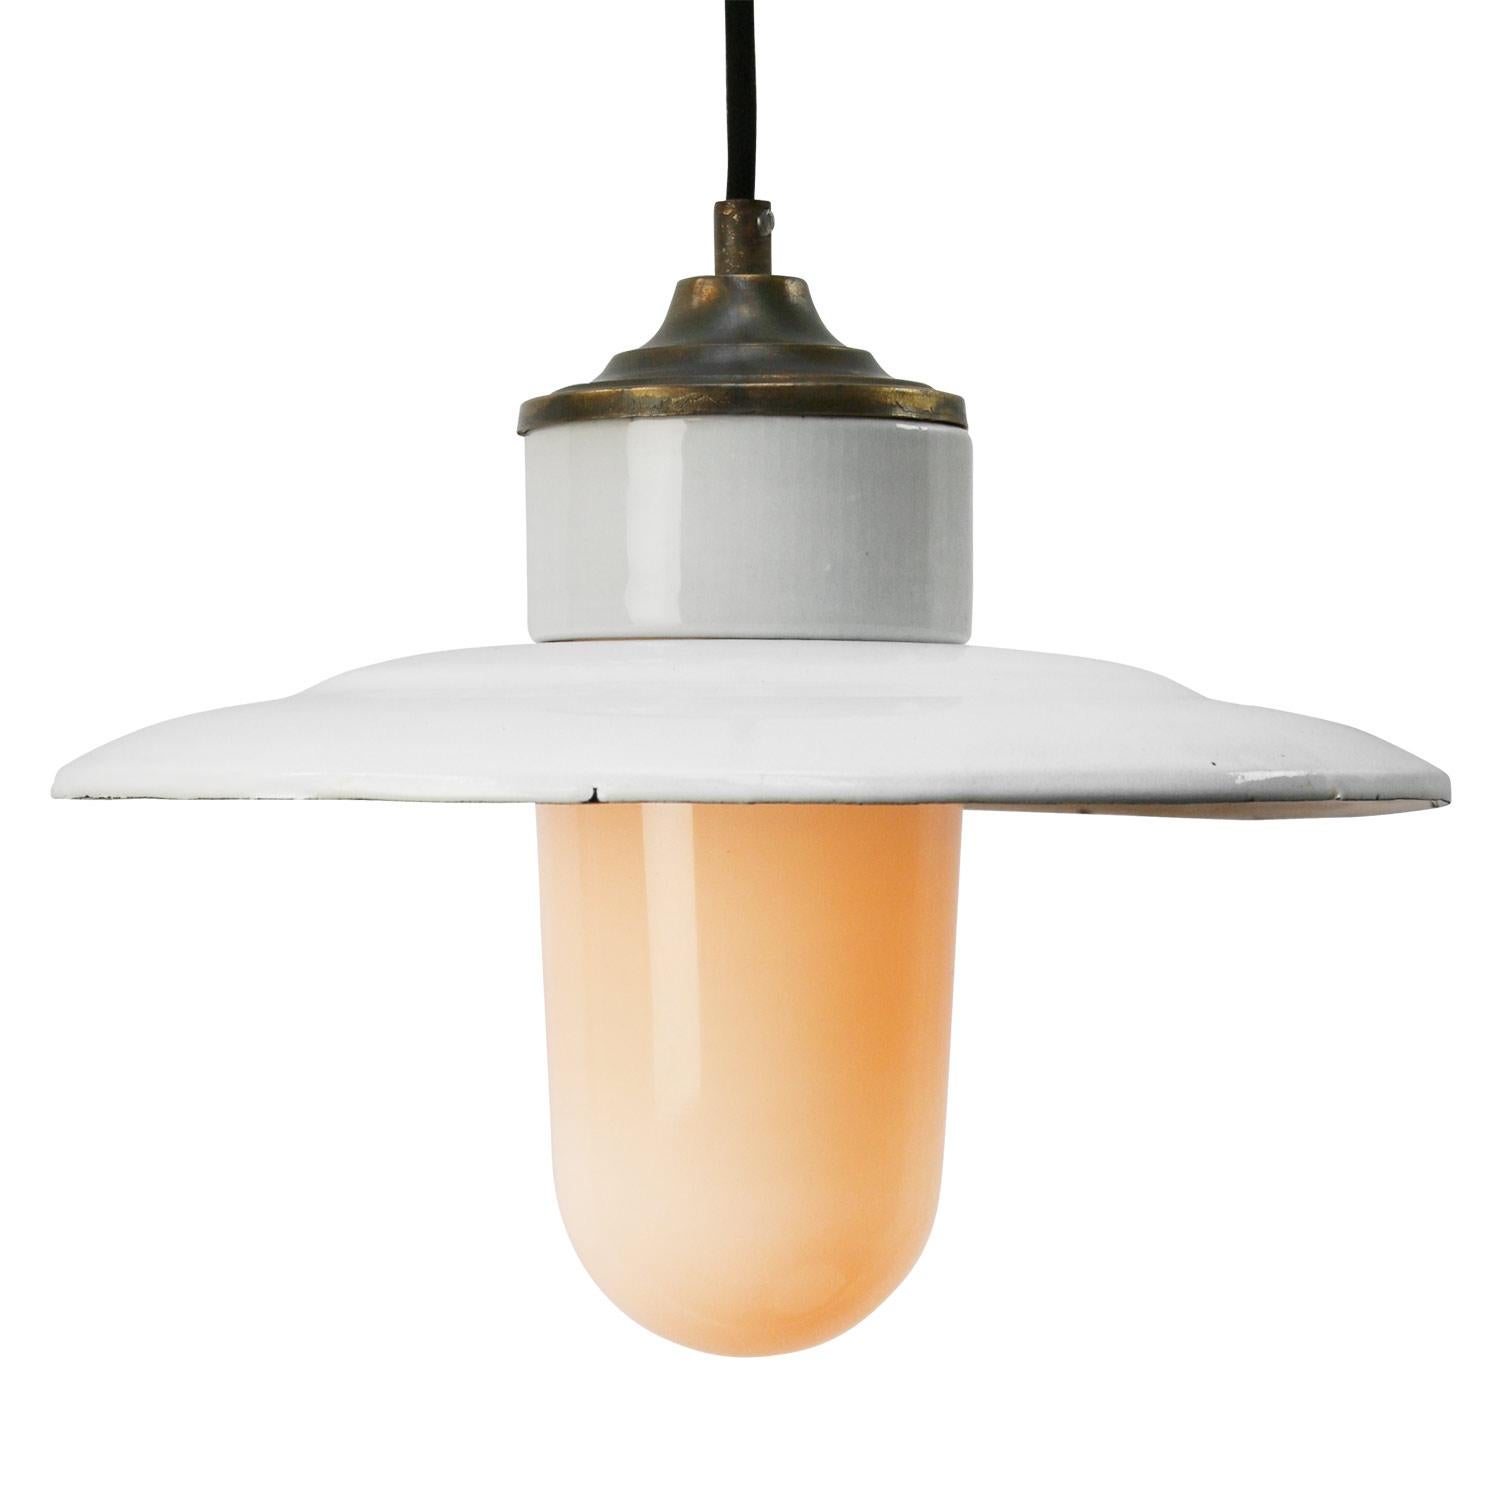 Porcelain industrial hanging lamp.
White porcelain, brass and white opaline milk glass.
White enamel shade
2 conductors, no ground.

Weight: 1.70 kg / 3.7 lb

Priced per individual item. All lamps have been made suitable by international